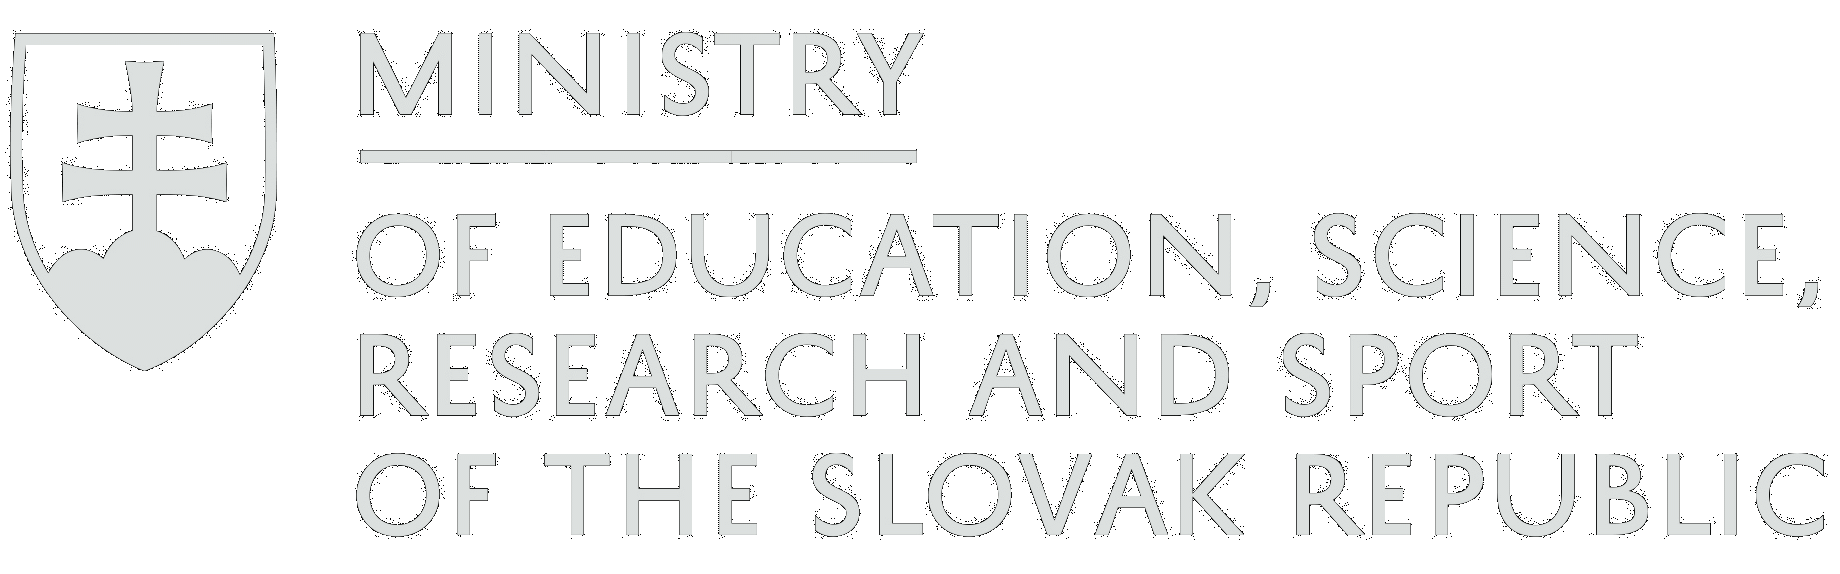 The Ministry of Education, Science, Research and Sport of the Slovak Republic